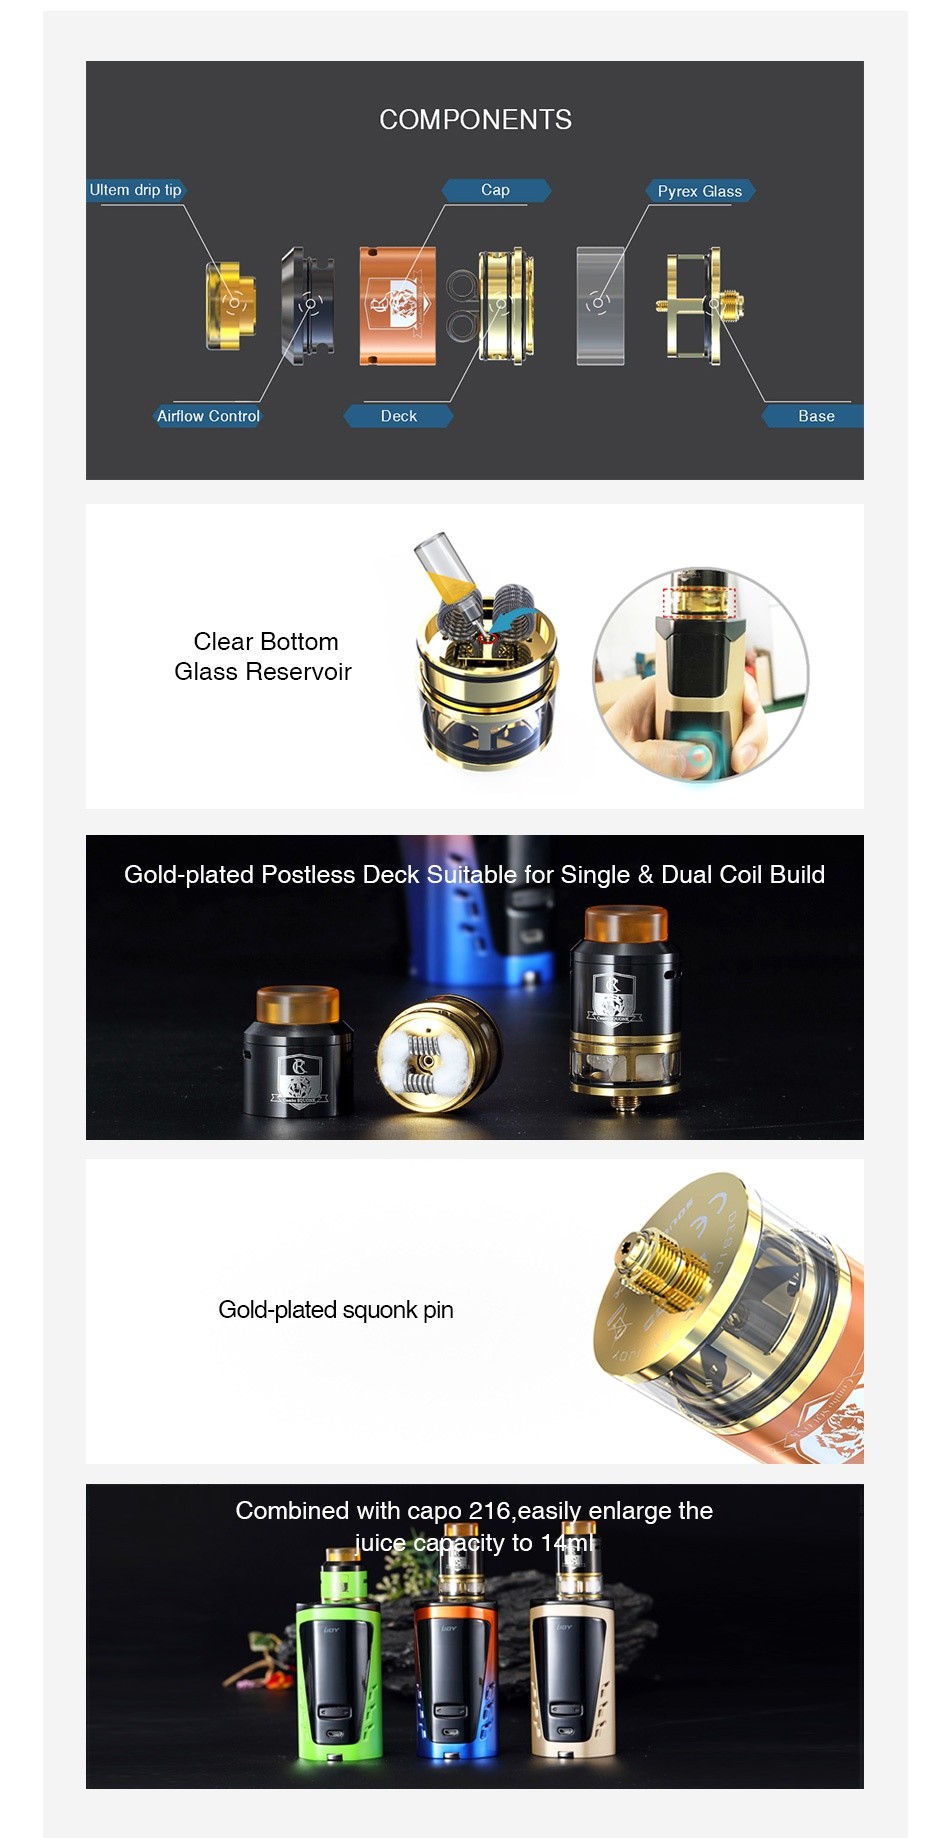 IJOY COMBO Squonk RDTA 4ml COMPONENTS Ultem drip Airflow Control Base Clear bottom Glass reservoir Gold plated Postless Deck Suitable for Single dual Coil Build Gold plated squonk pin Combined with capo 216  easily enlarge the uice capacity to 1 4m